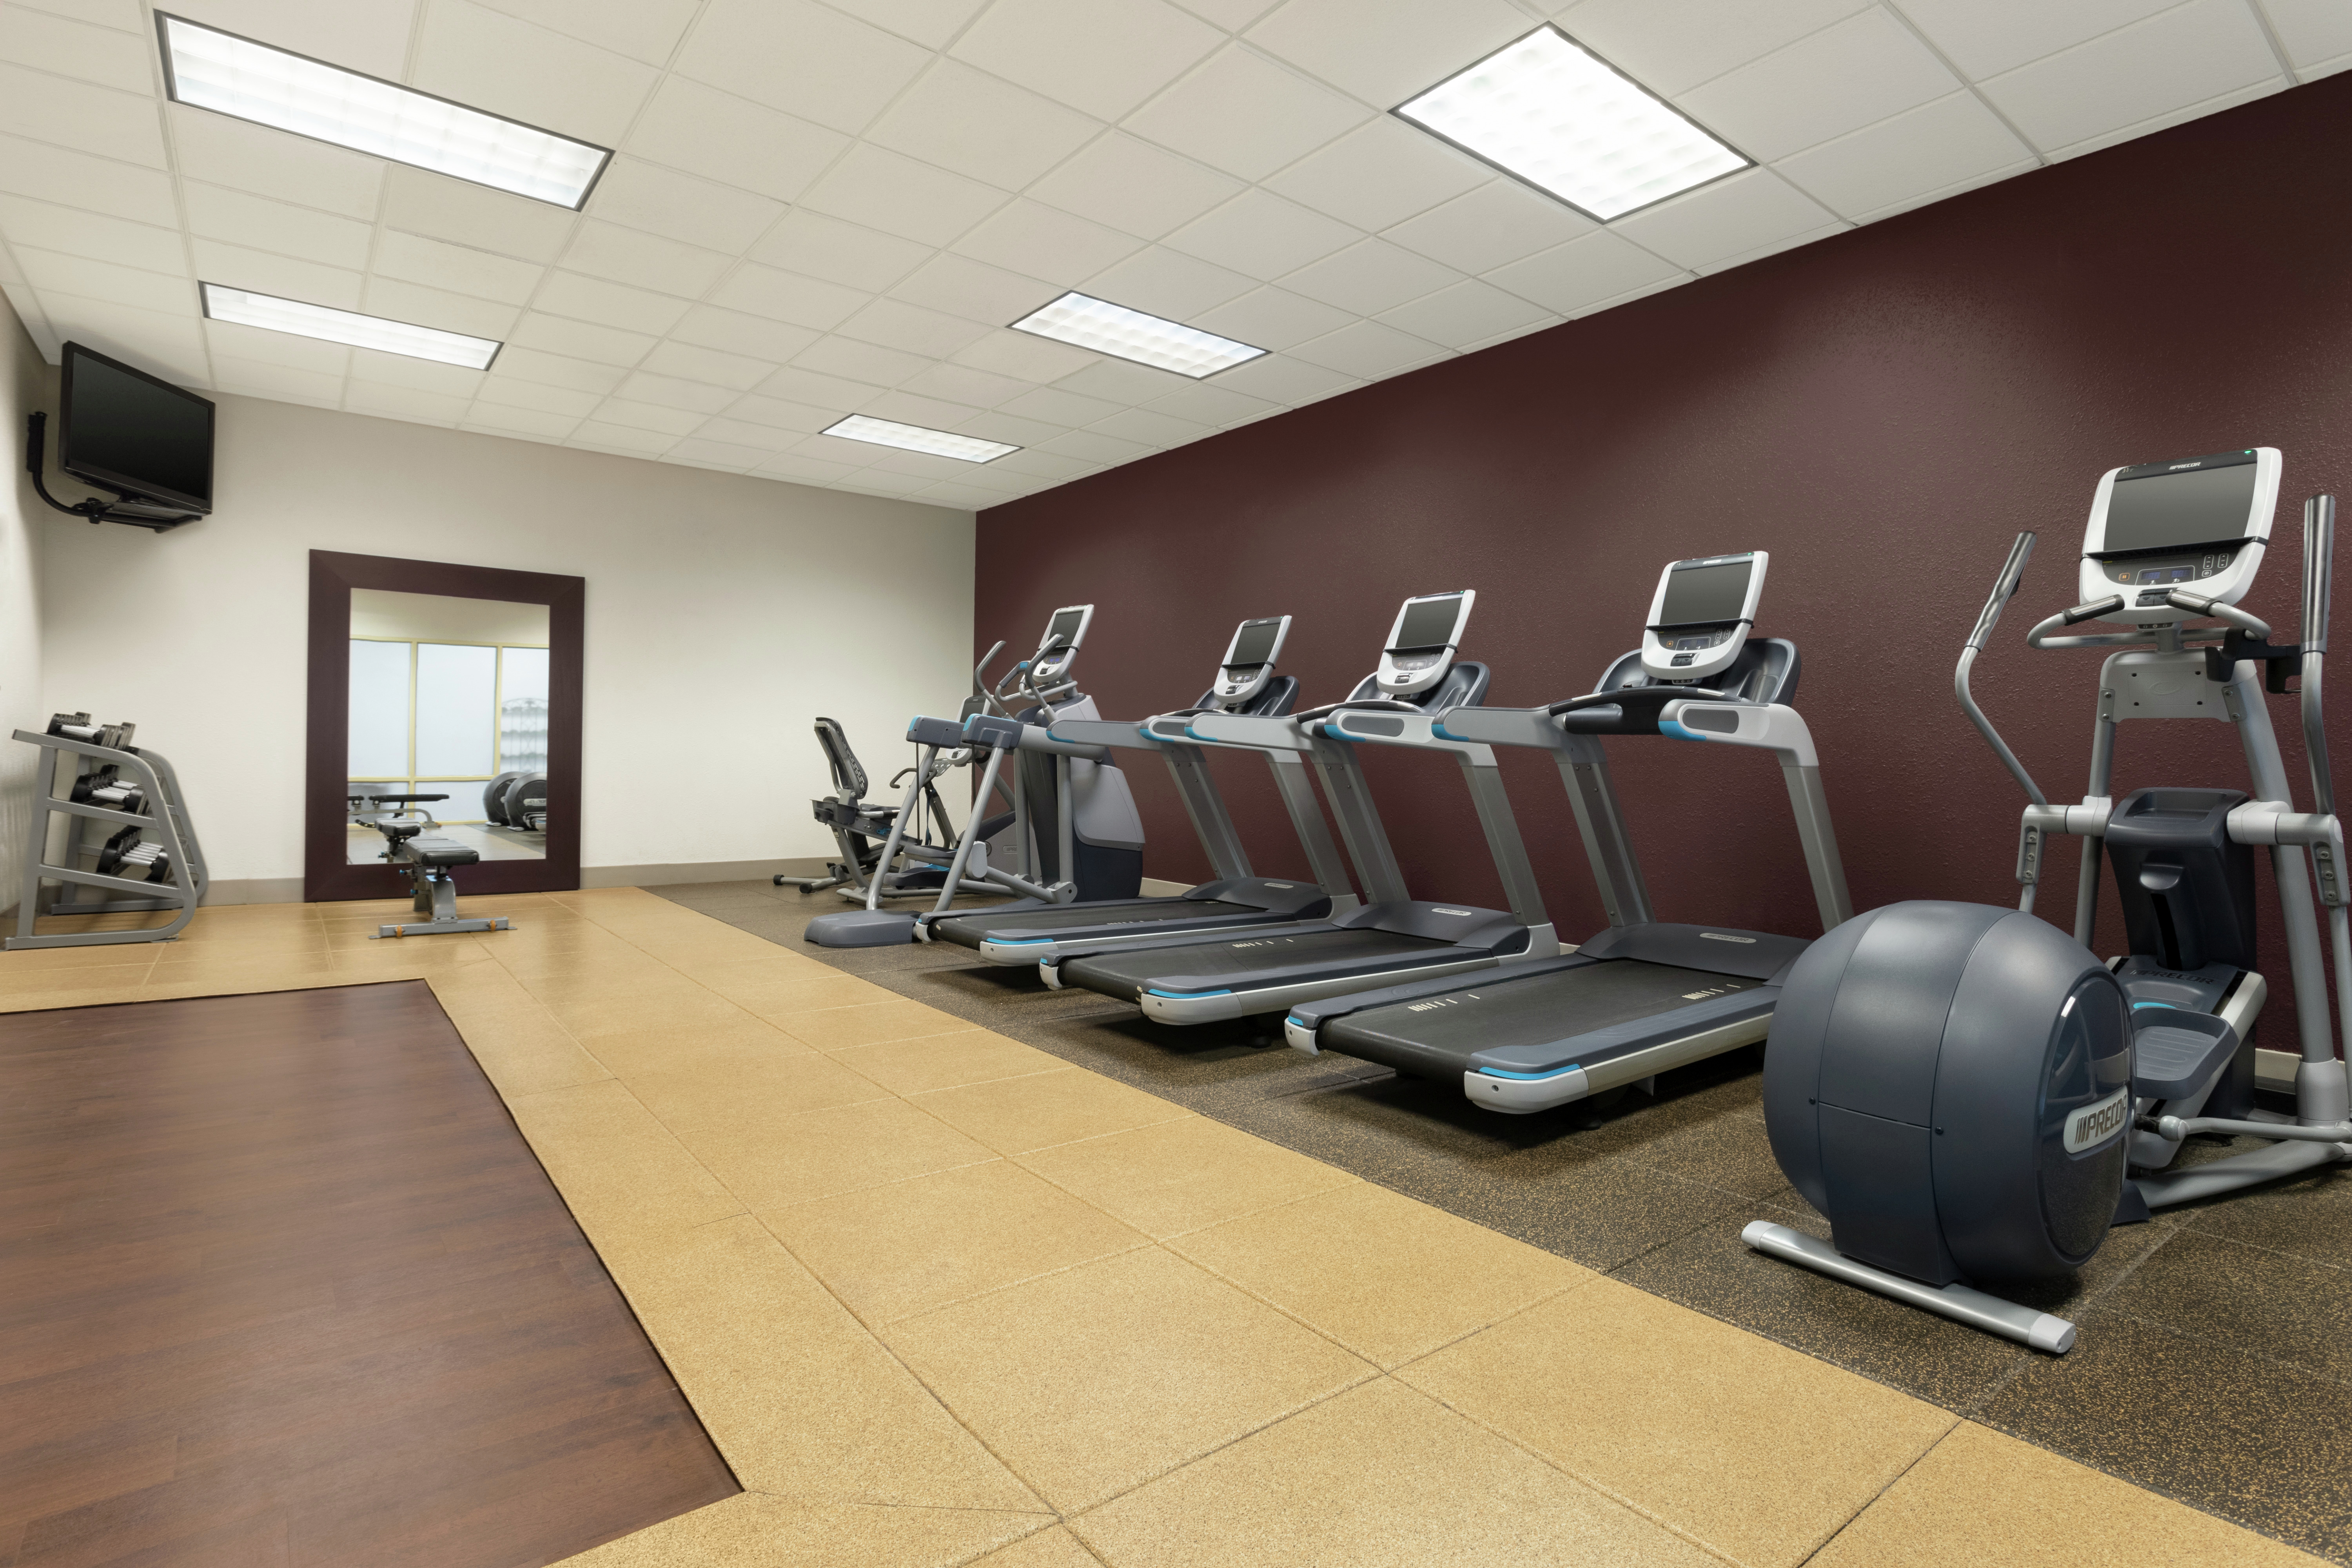 Fitness Center with Treadmills, Elliptical, Room Technology, and Mirror